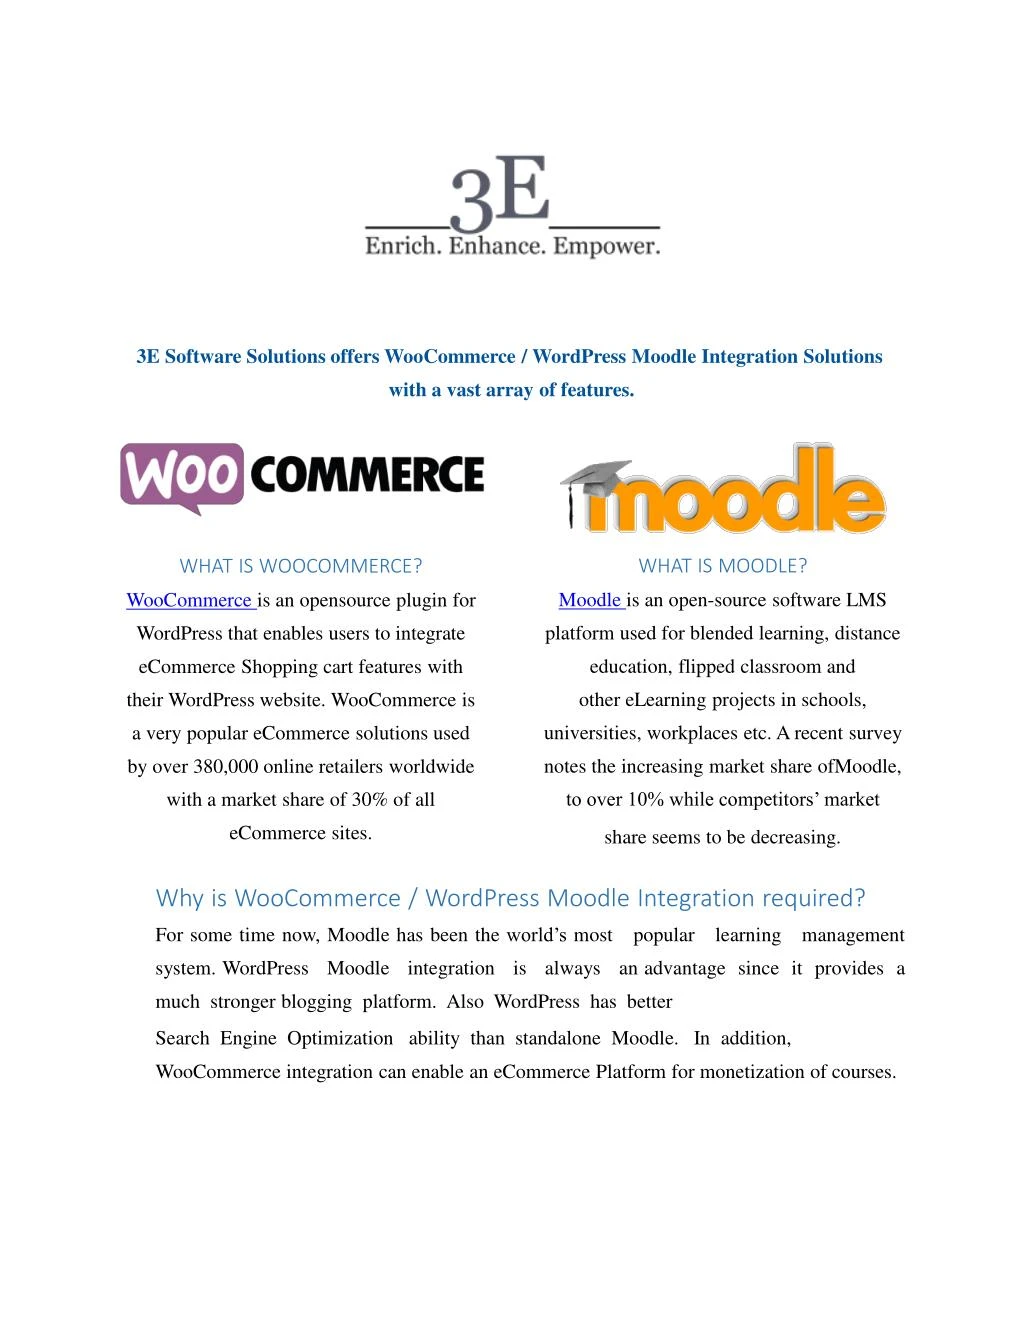 3e software solutions offers woocommerce